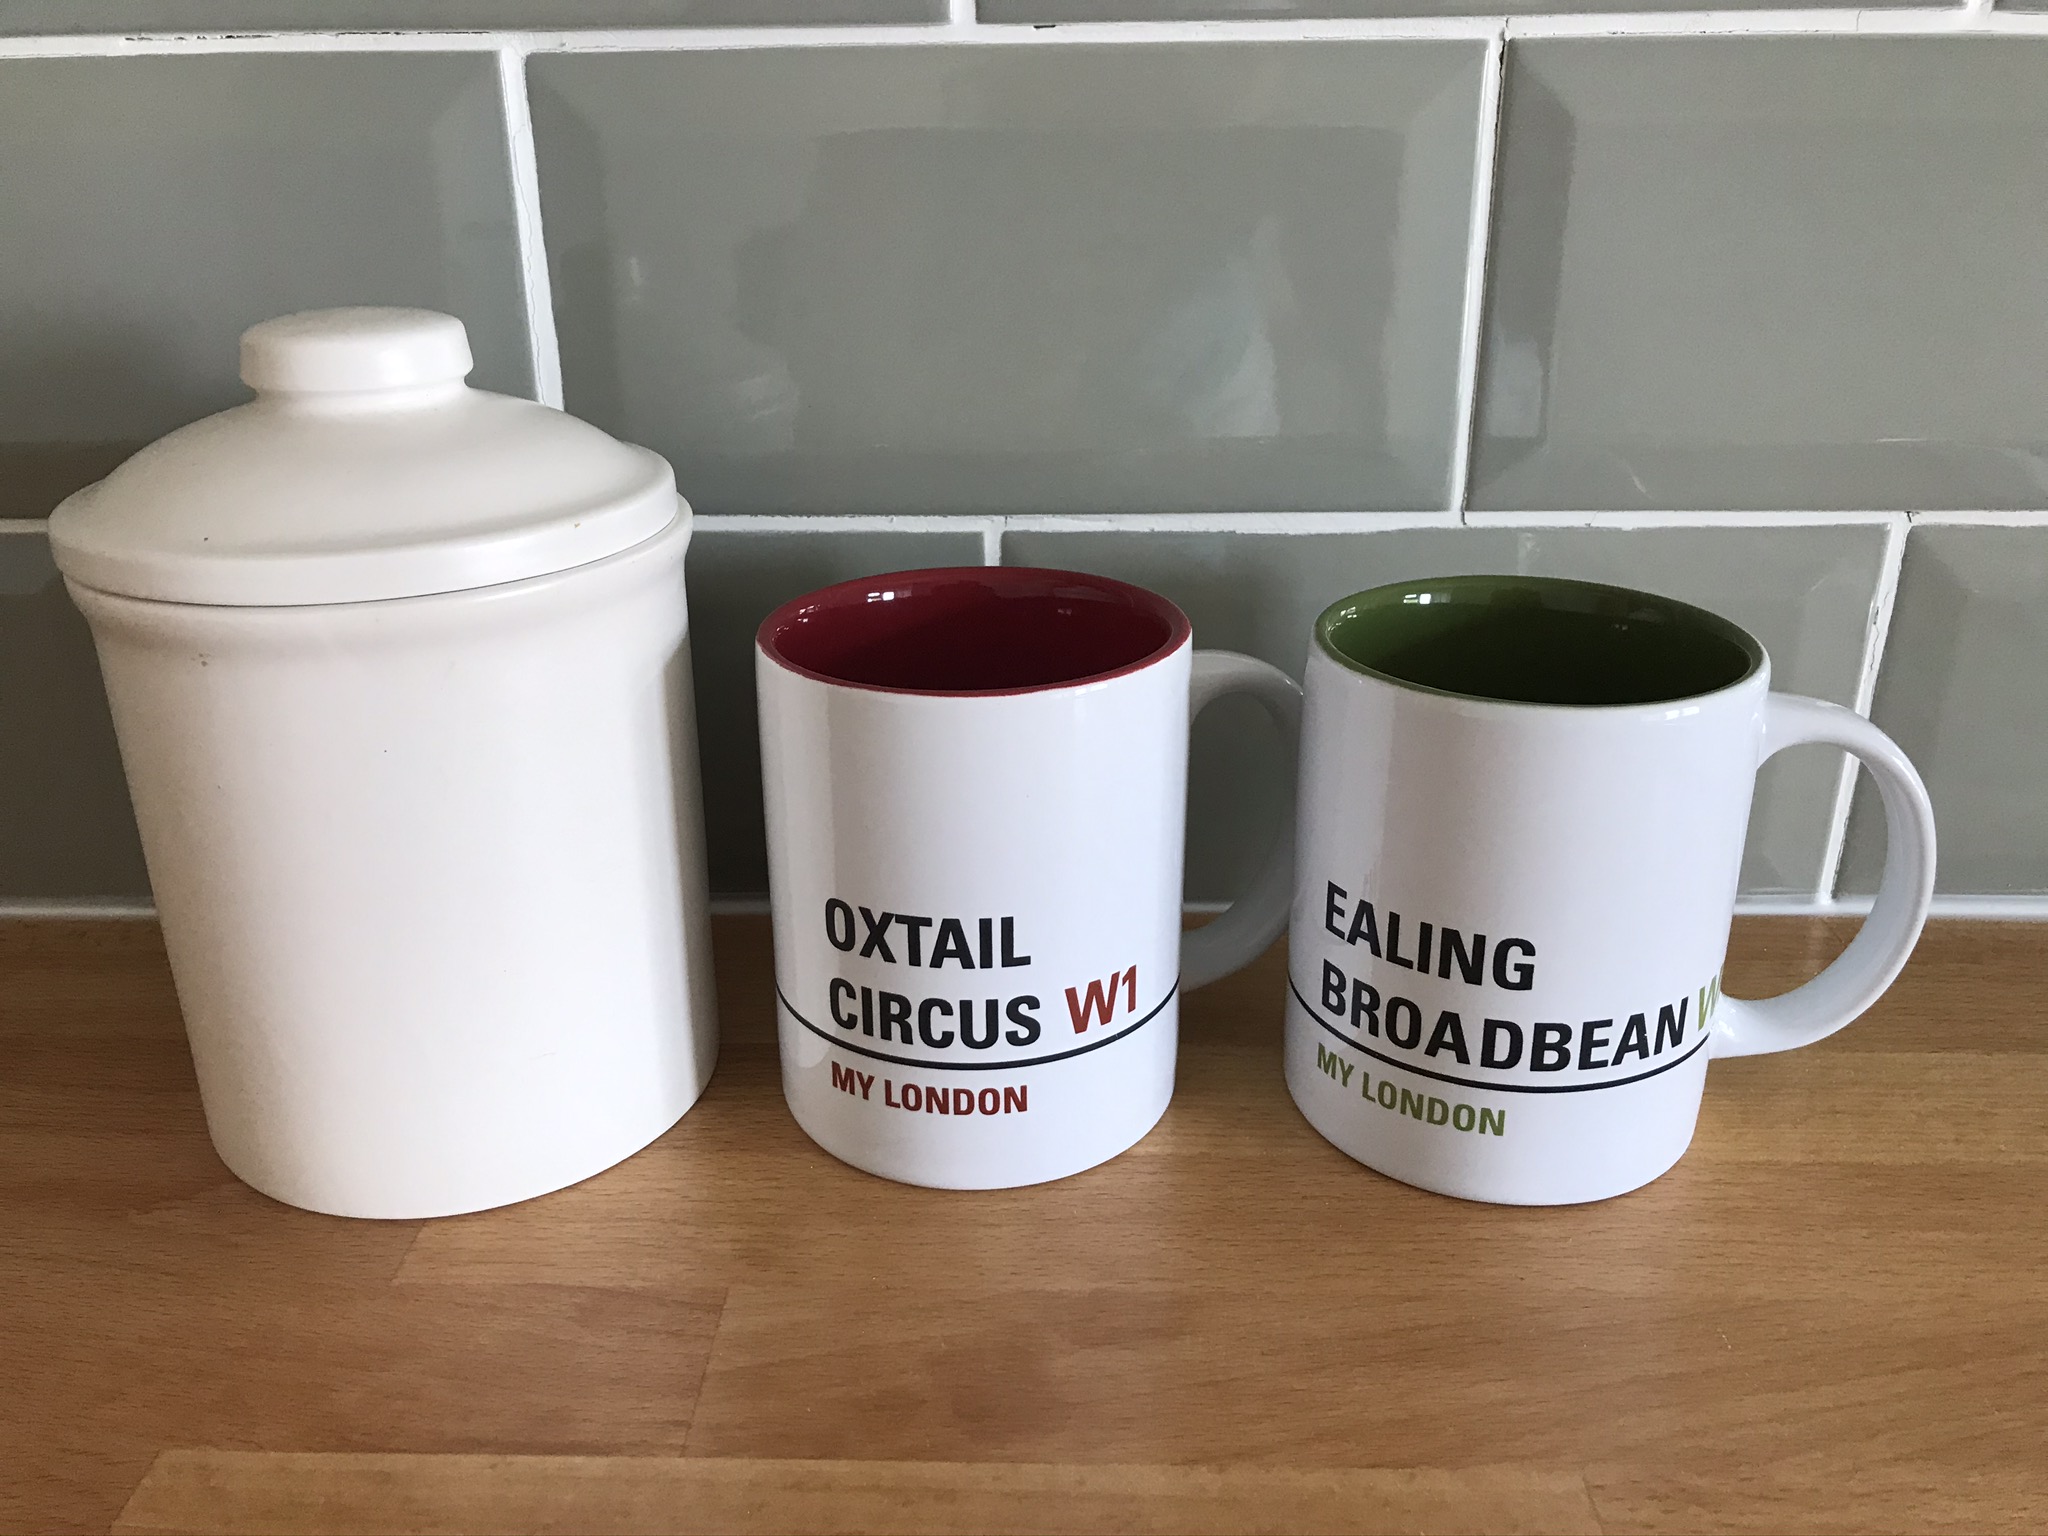 Cannister and mugs